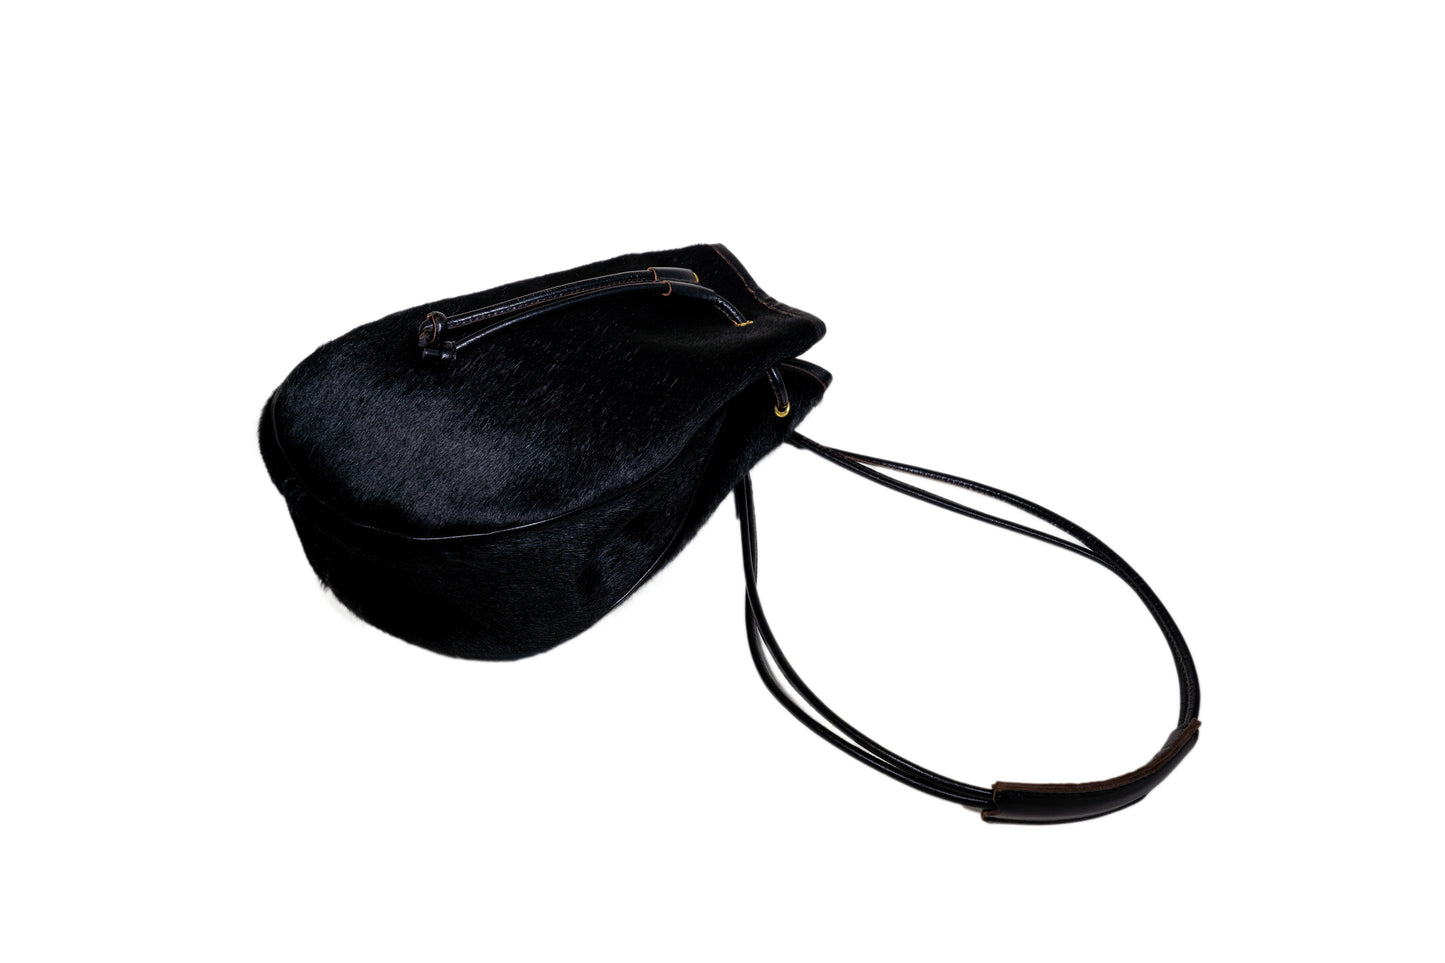 HORSE HAIR LEATHER POUCH